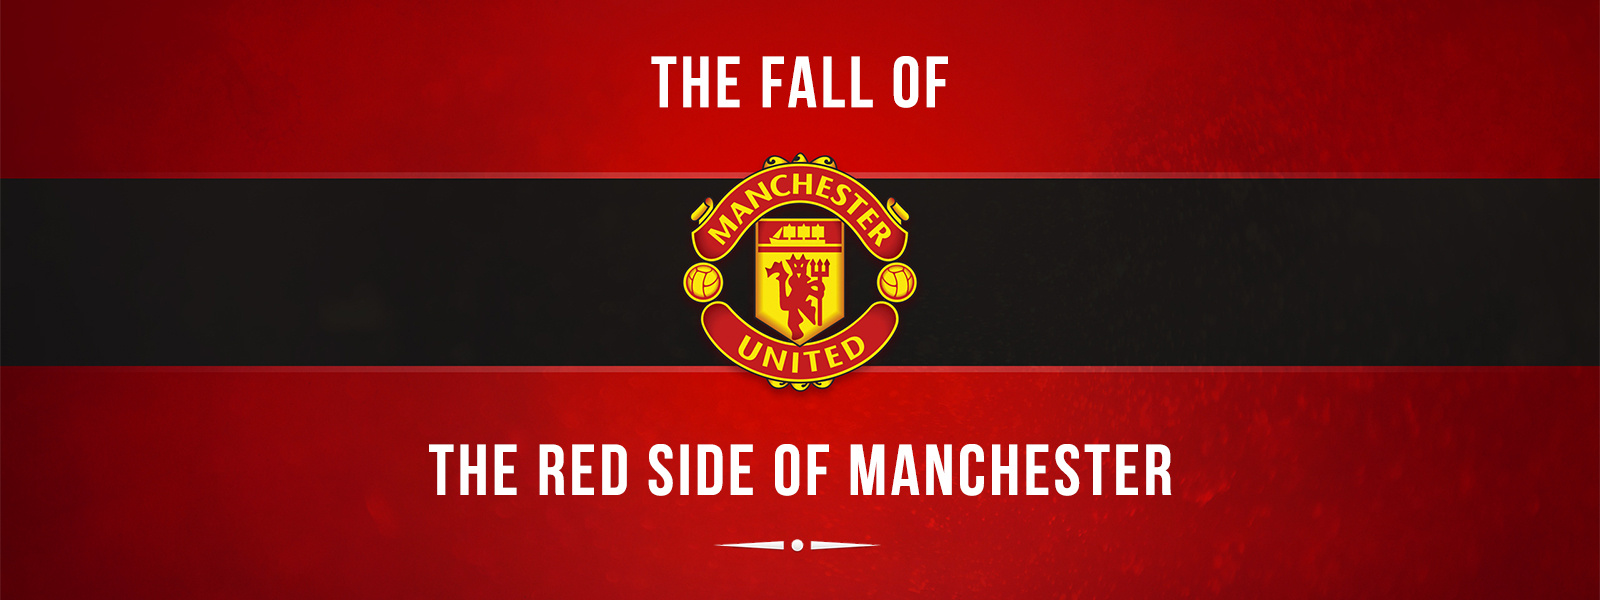 The Fall Of The Red Side Of Manchester United